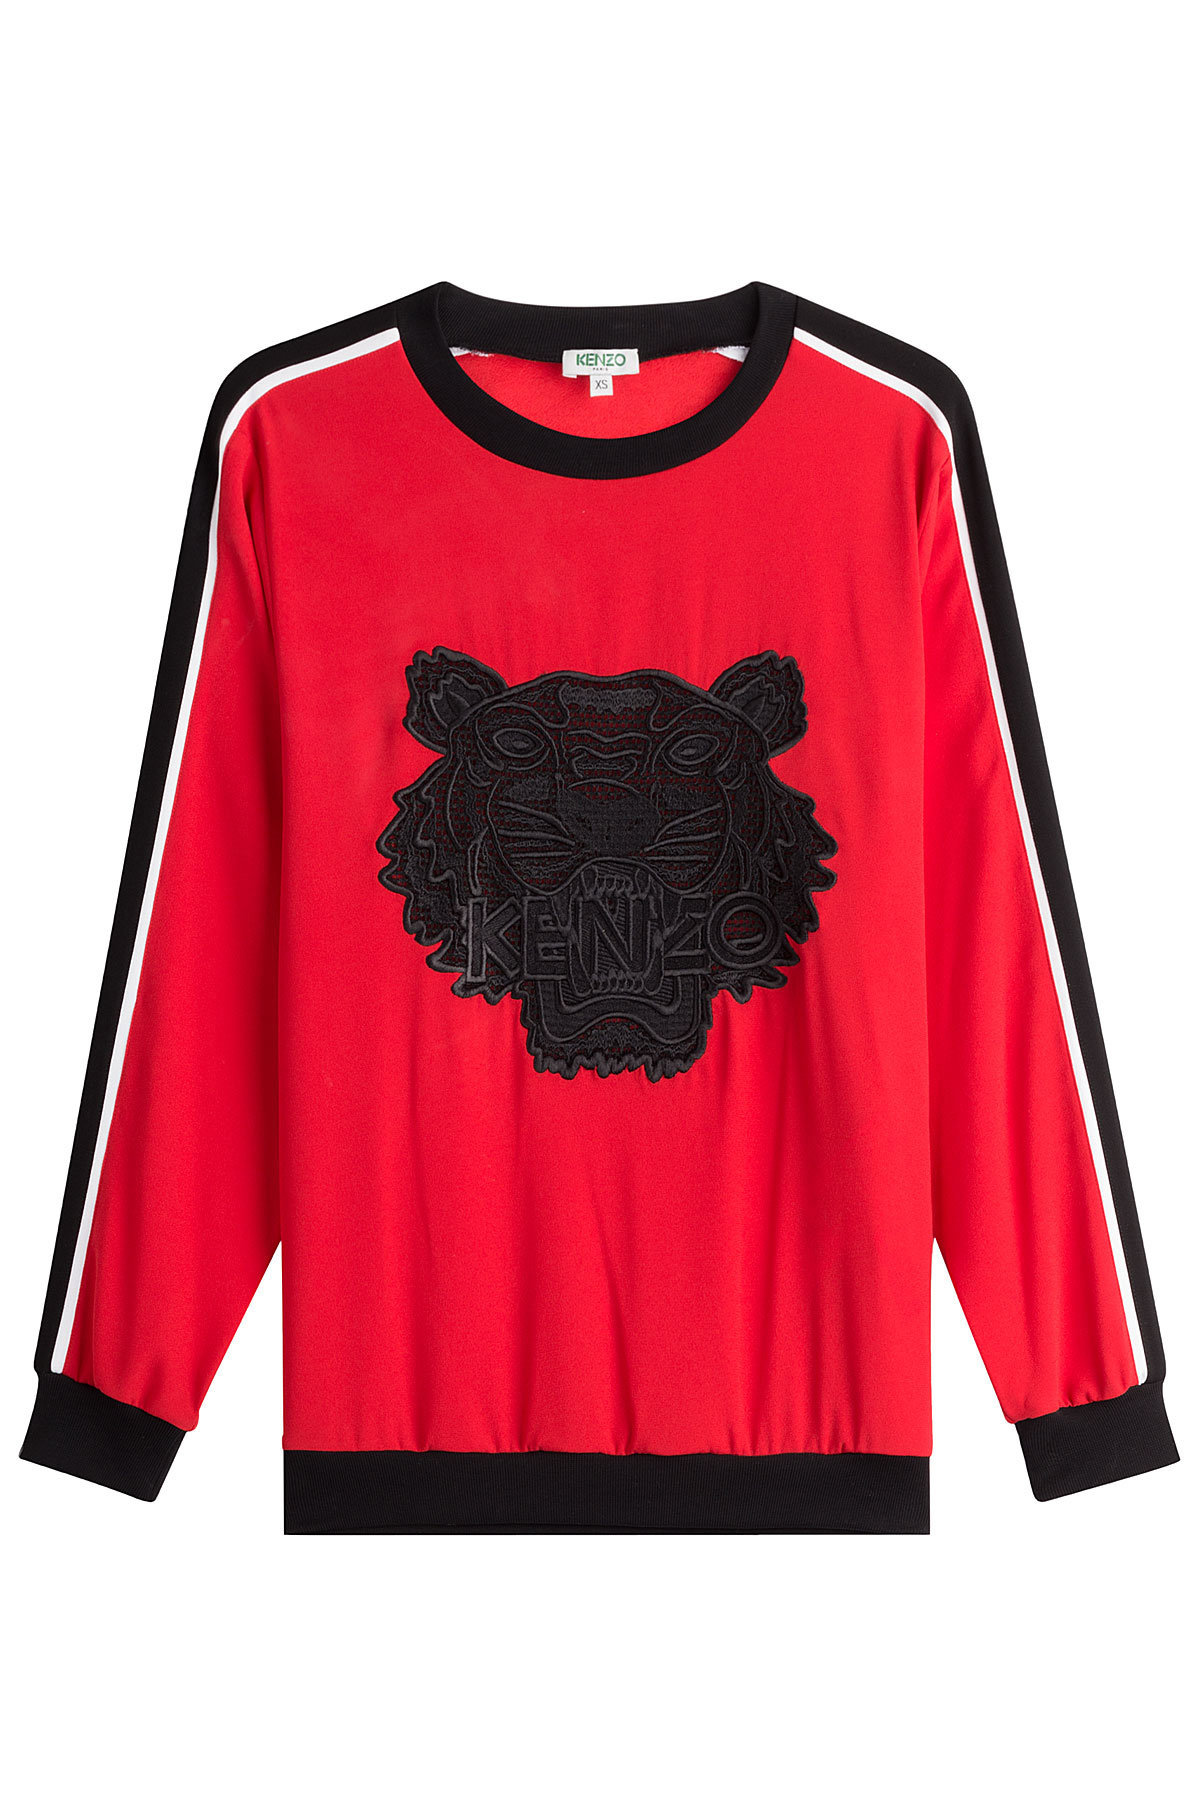 Kenzo - Top with Embroidered Motif